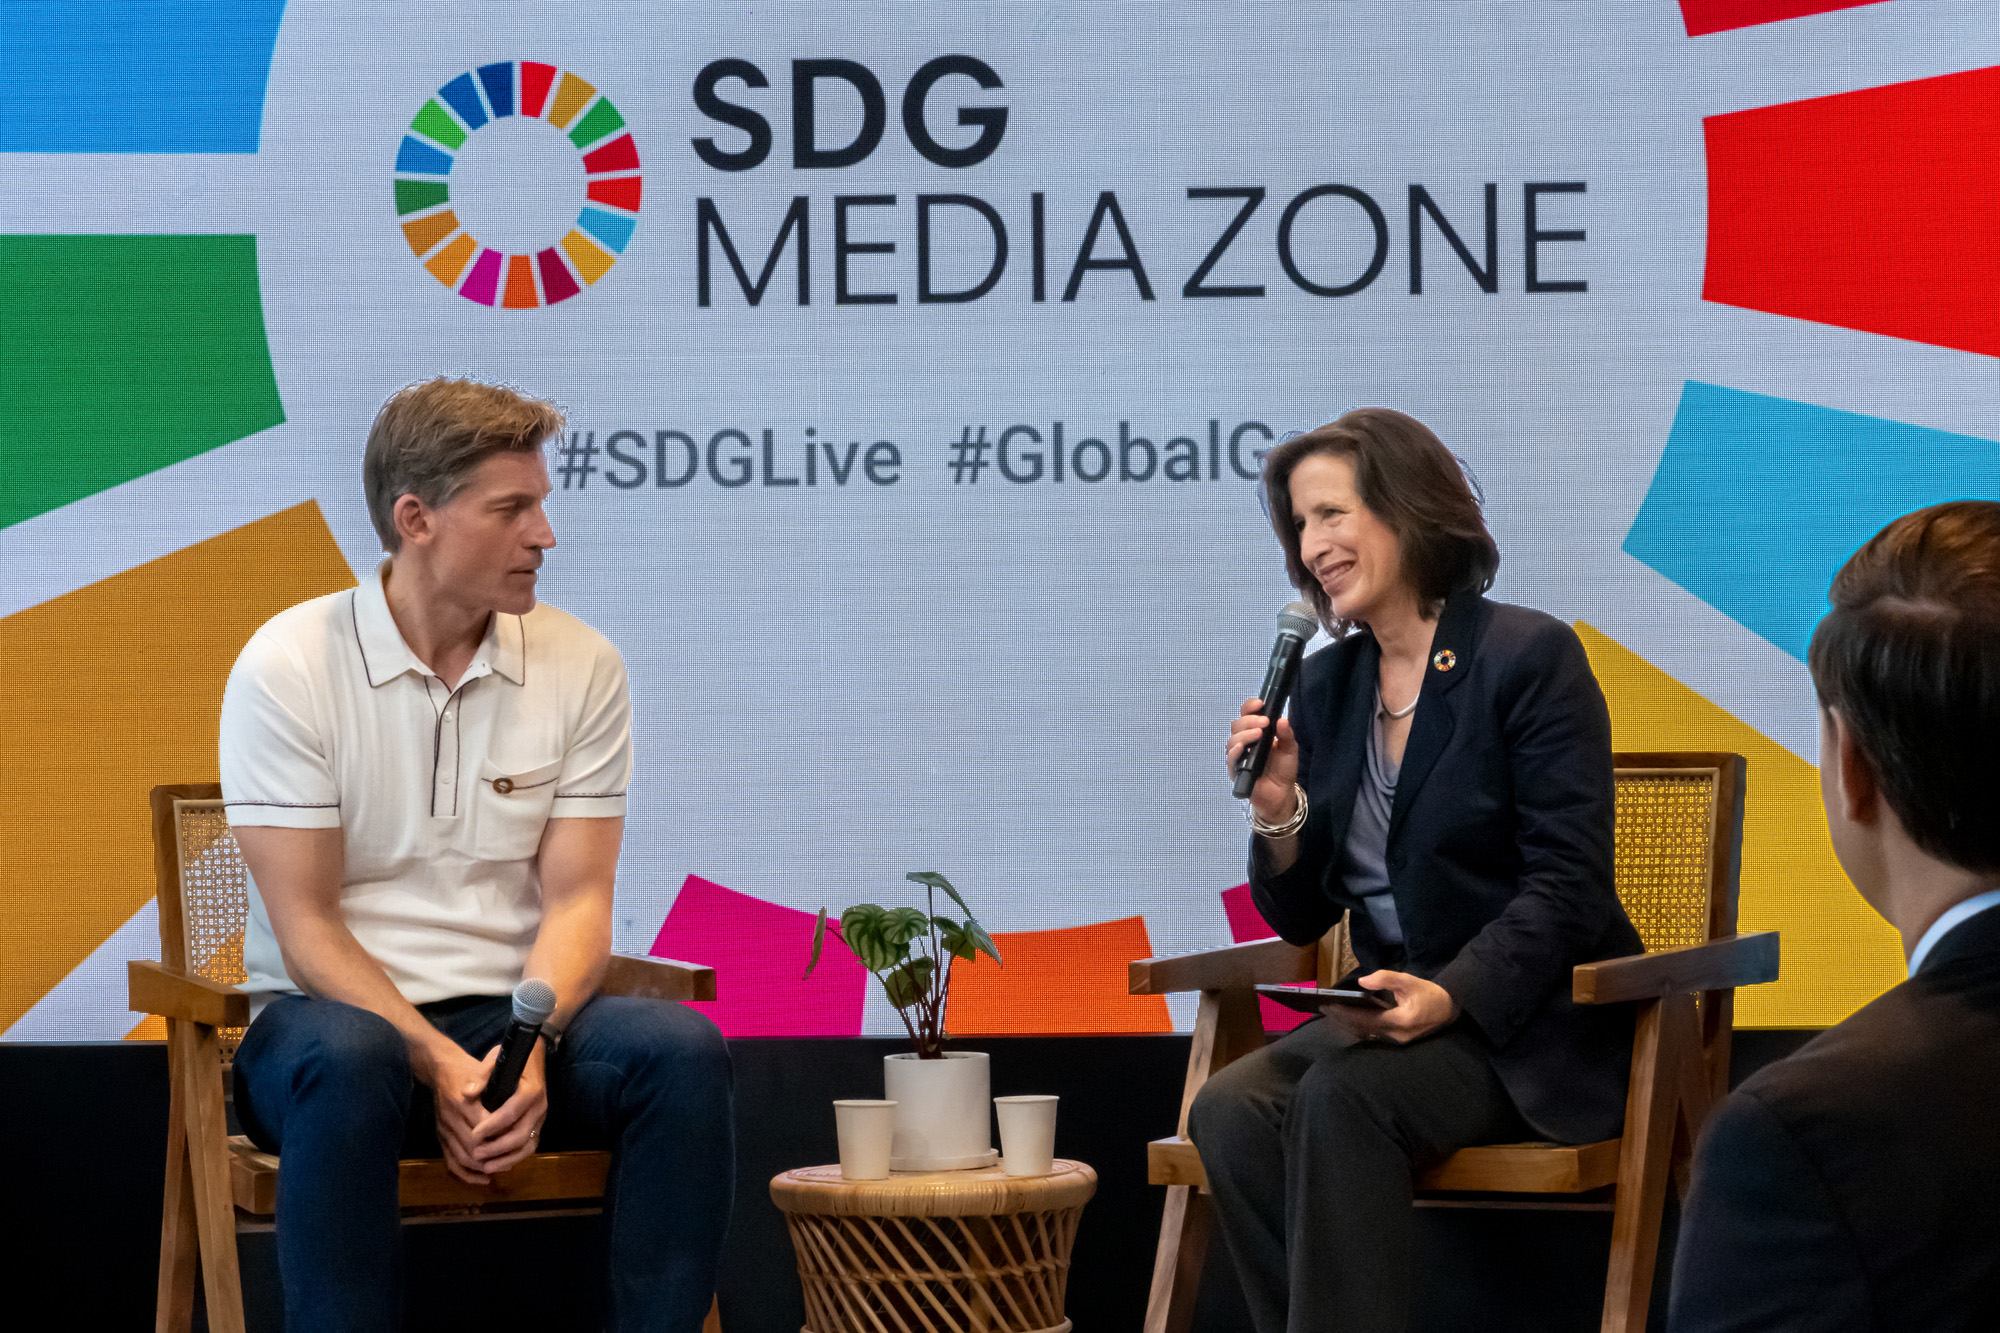 UN's Under-Secretary-General for Global Communications Interviewing actor Nikolaj Coster-Waldau in the SDG Media Zone